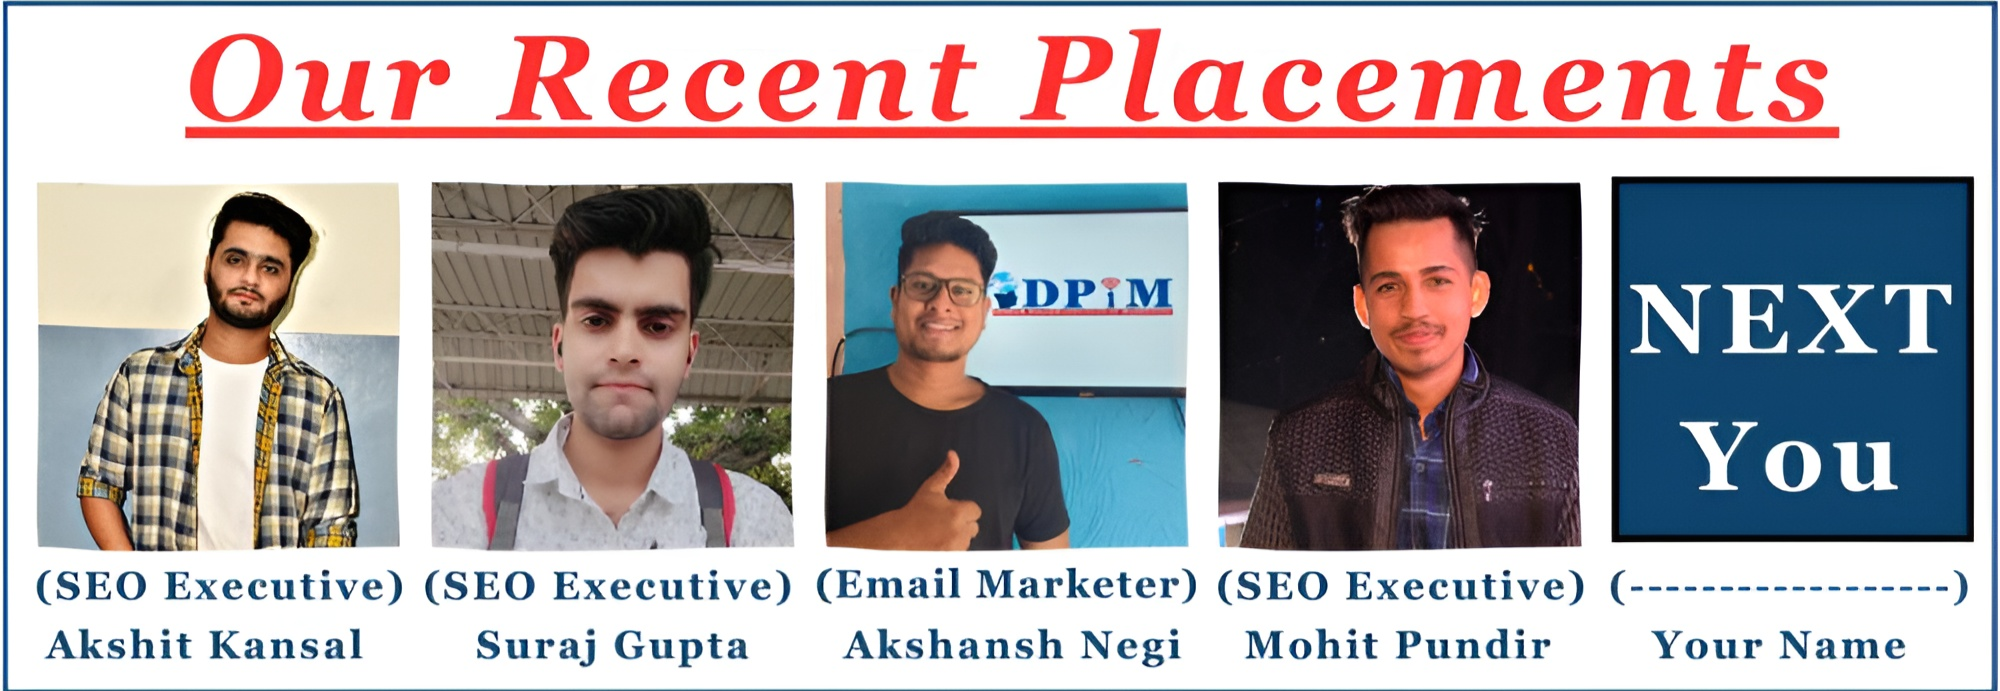 Our Recent Placements from DPIM